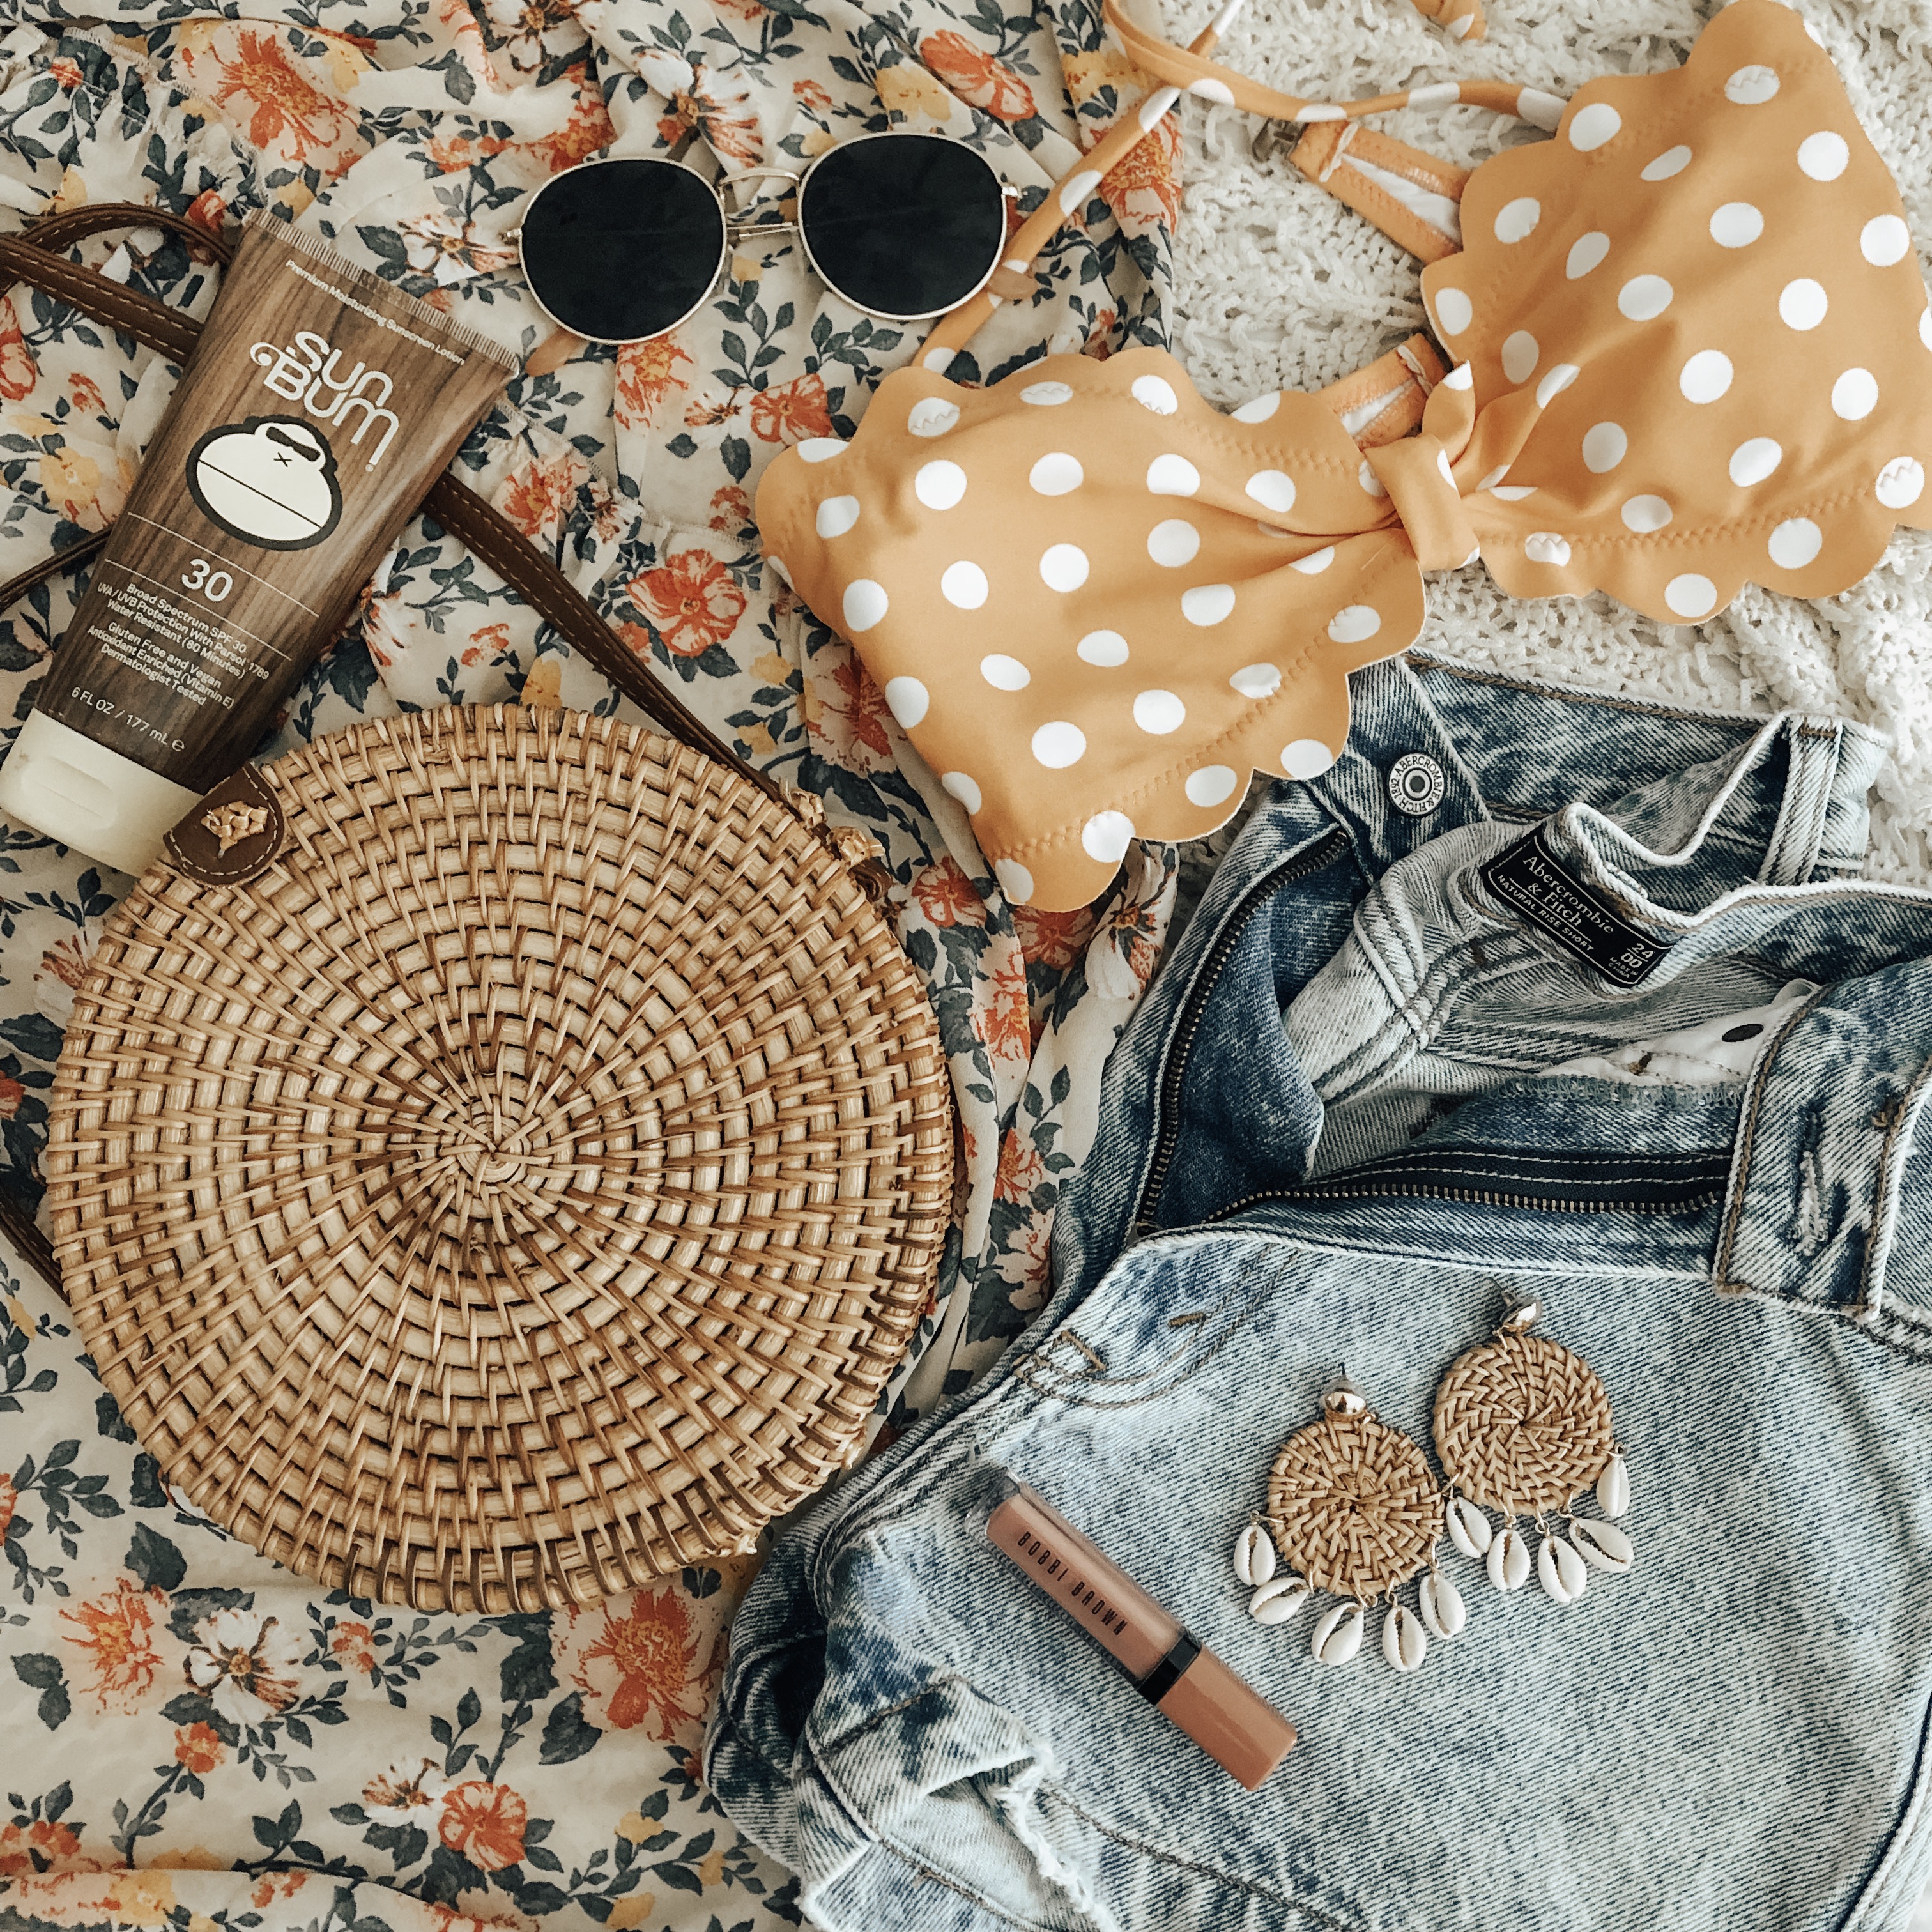 SUMMER ESSENTIALS- Jaclyn De Leon Style + Are you ready for Summer? I'm sharing all my must-have's for summer including swimwear, denim shorts, cover ups, sunscreen and much more!